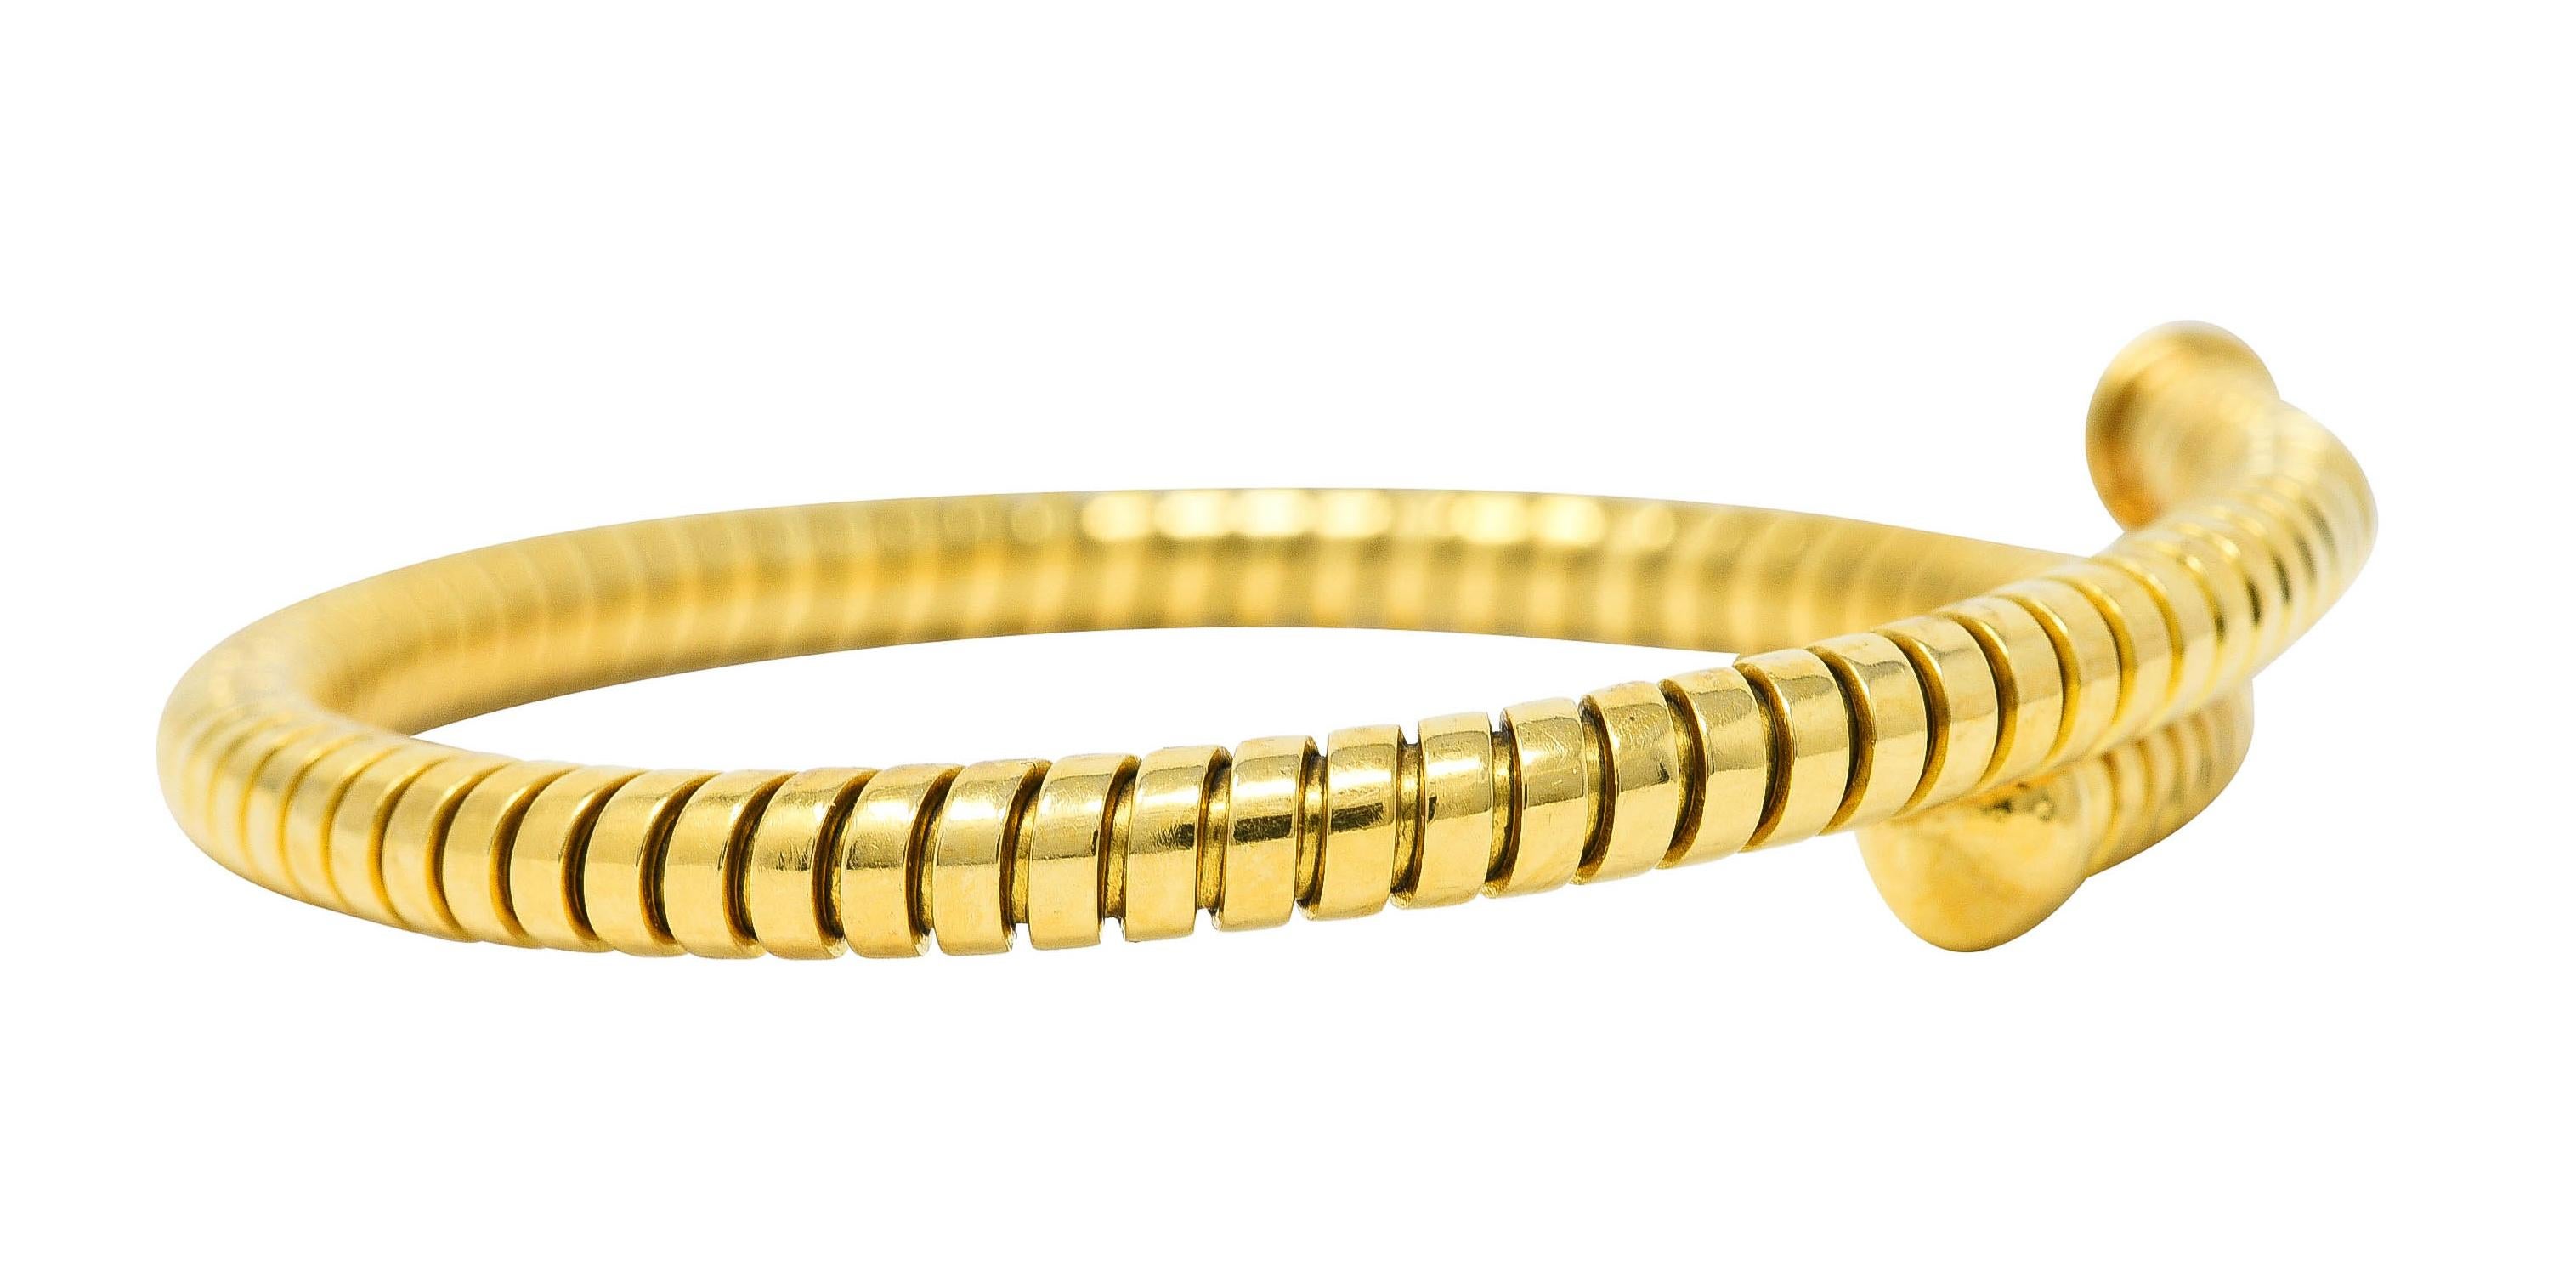 Designed as a rounded tubogas with grooved gold segments. Flexible with rounded nail head style terminals. Completed by high polished finish. Stamped 750 with Italian assay marks for 18 karat gold. Numbered and fully signed for Bvlgari, Made in